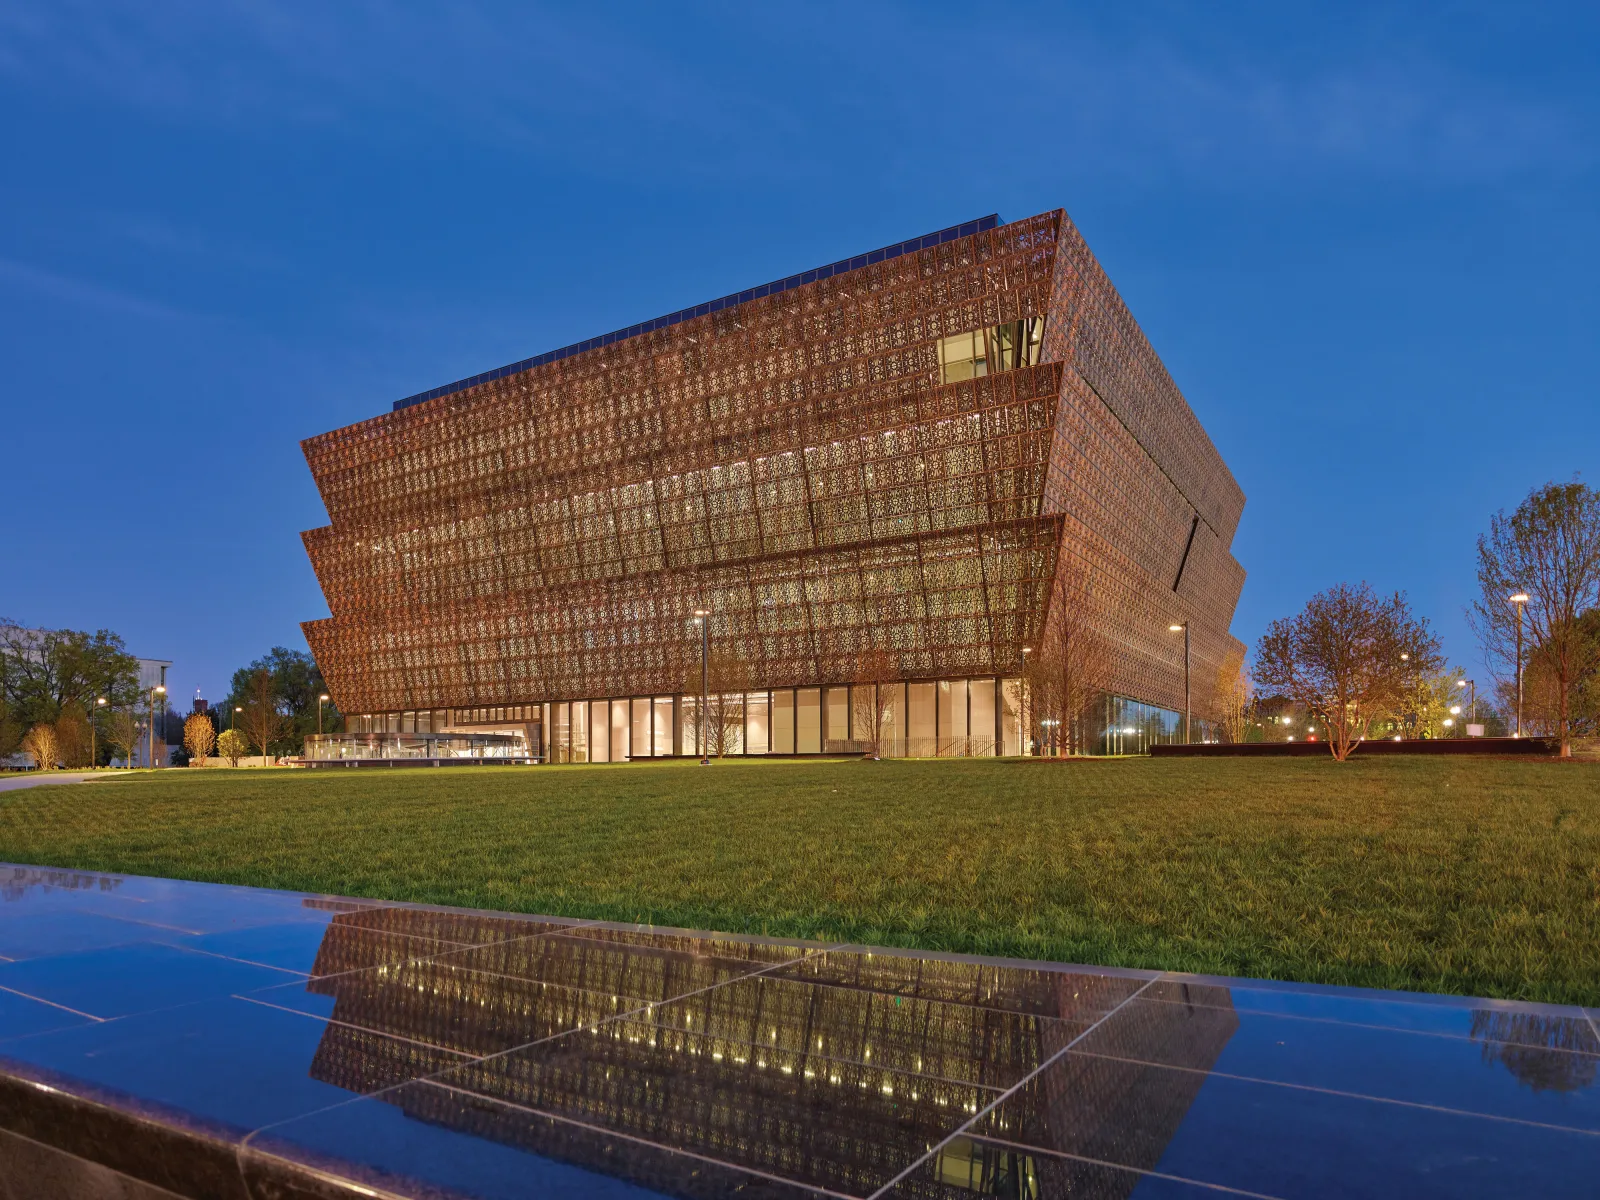 Exterior of National Museum of African American History and Culture building. Photo by Alan Karchmer